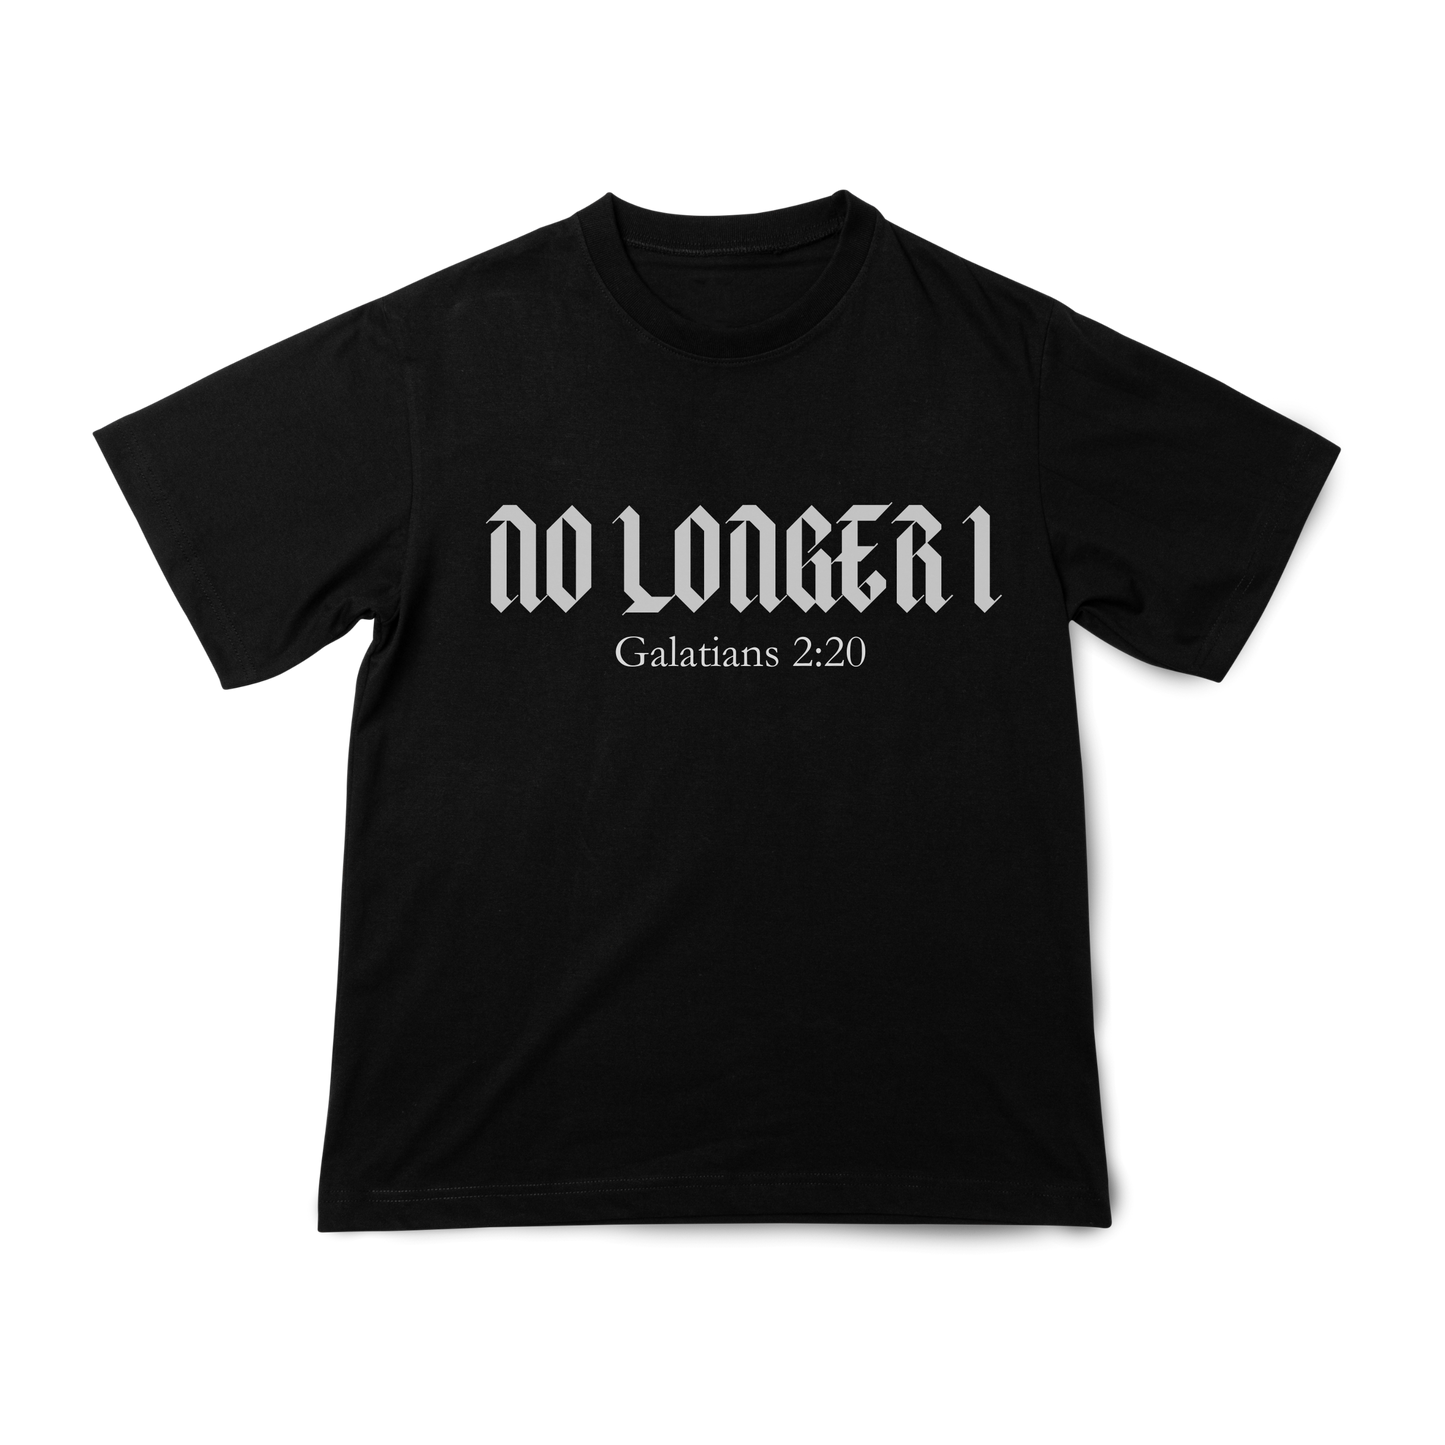 No Longer I - LIMITED EDITION T-Shirt black with white print